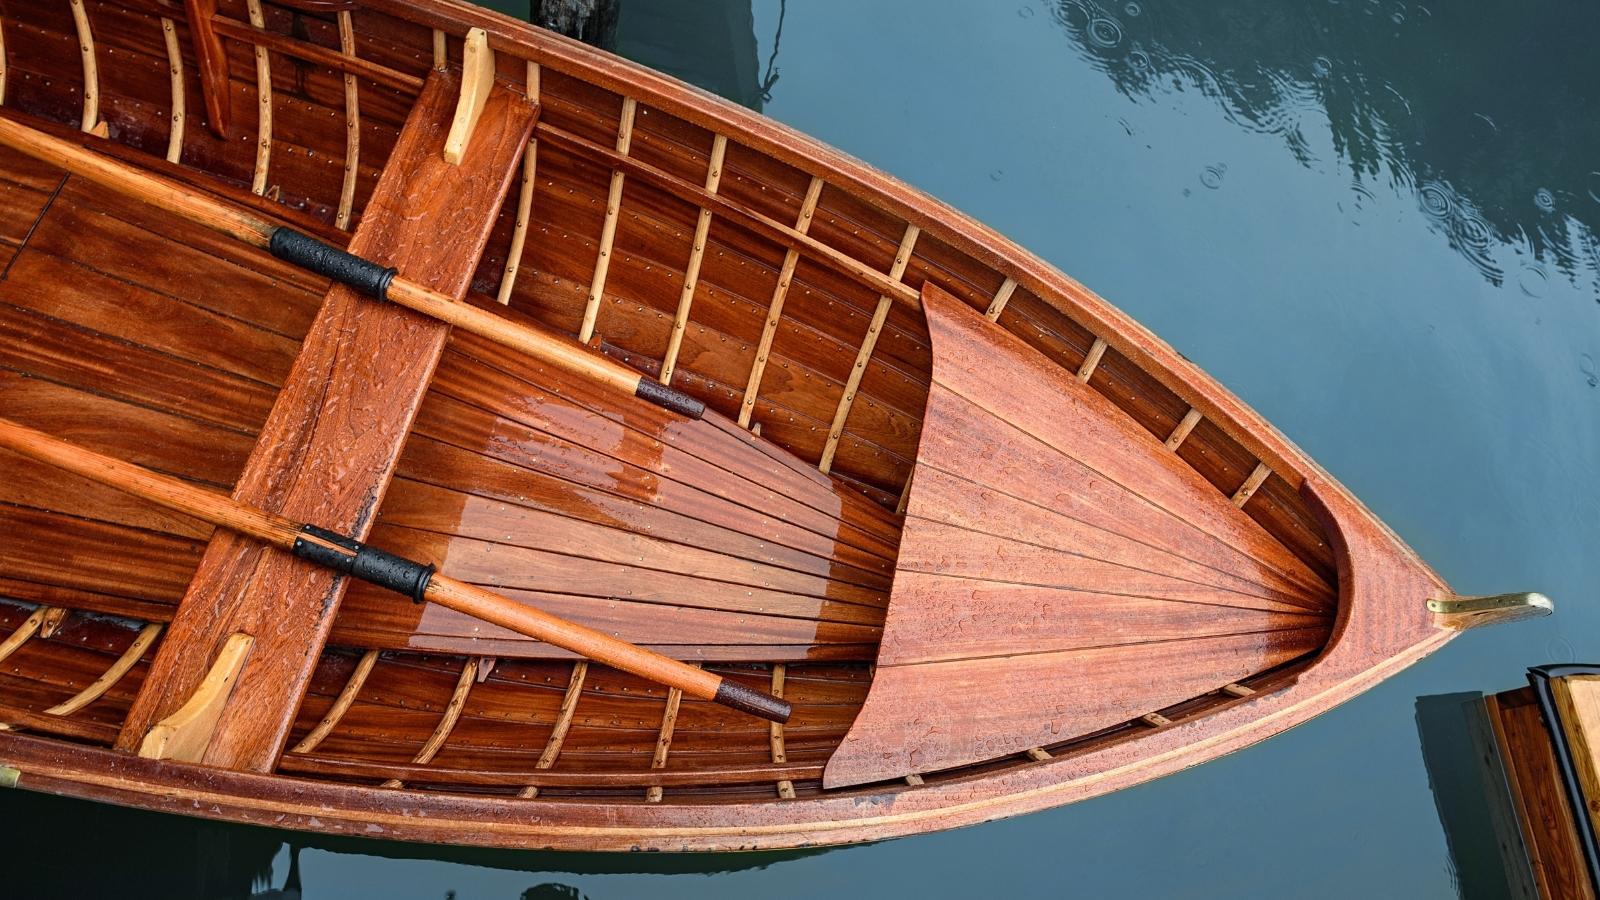 The wooden boat and the mission - Understanding your dreams - Kaya